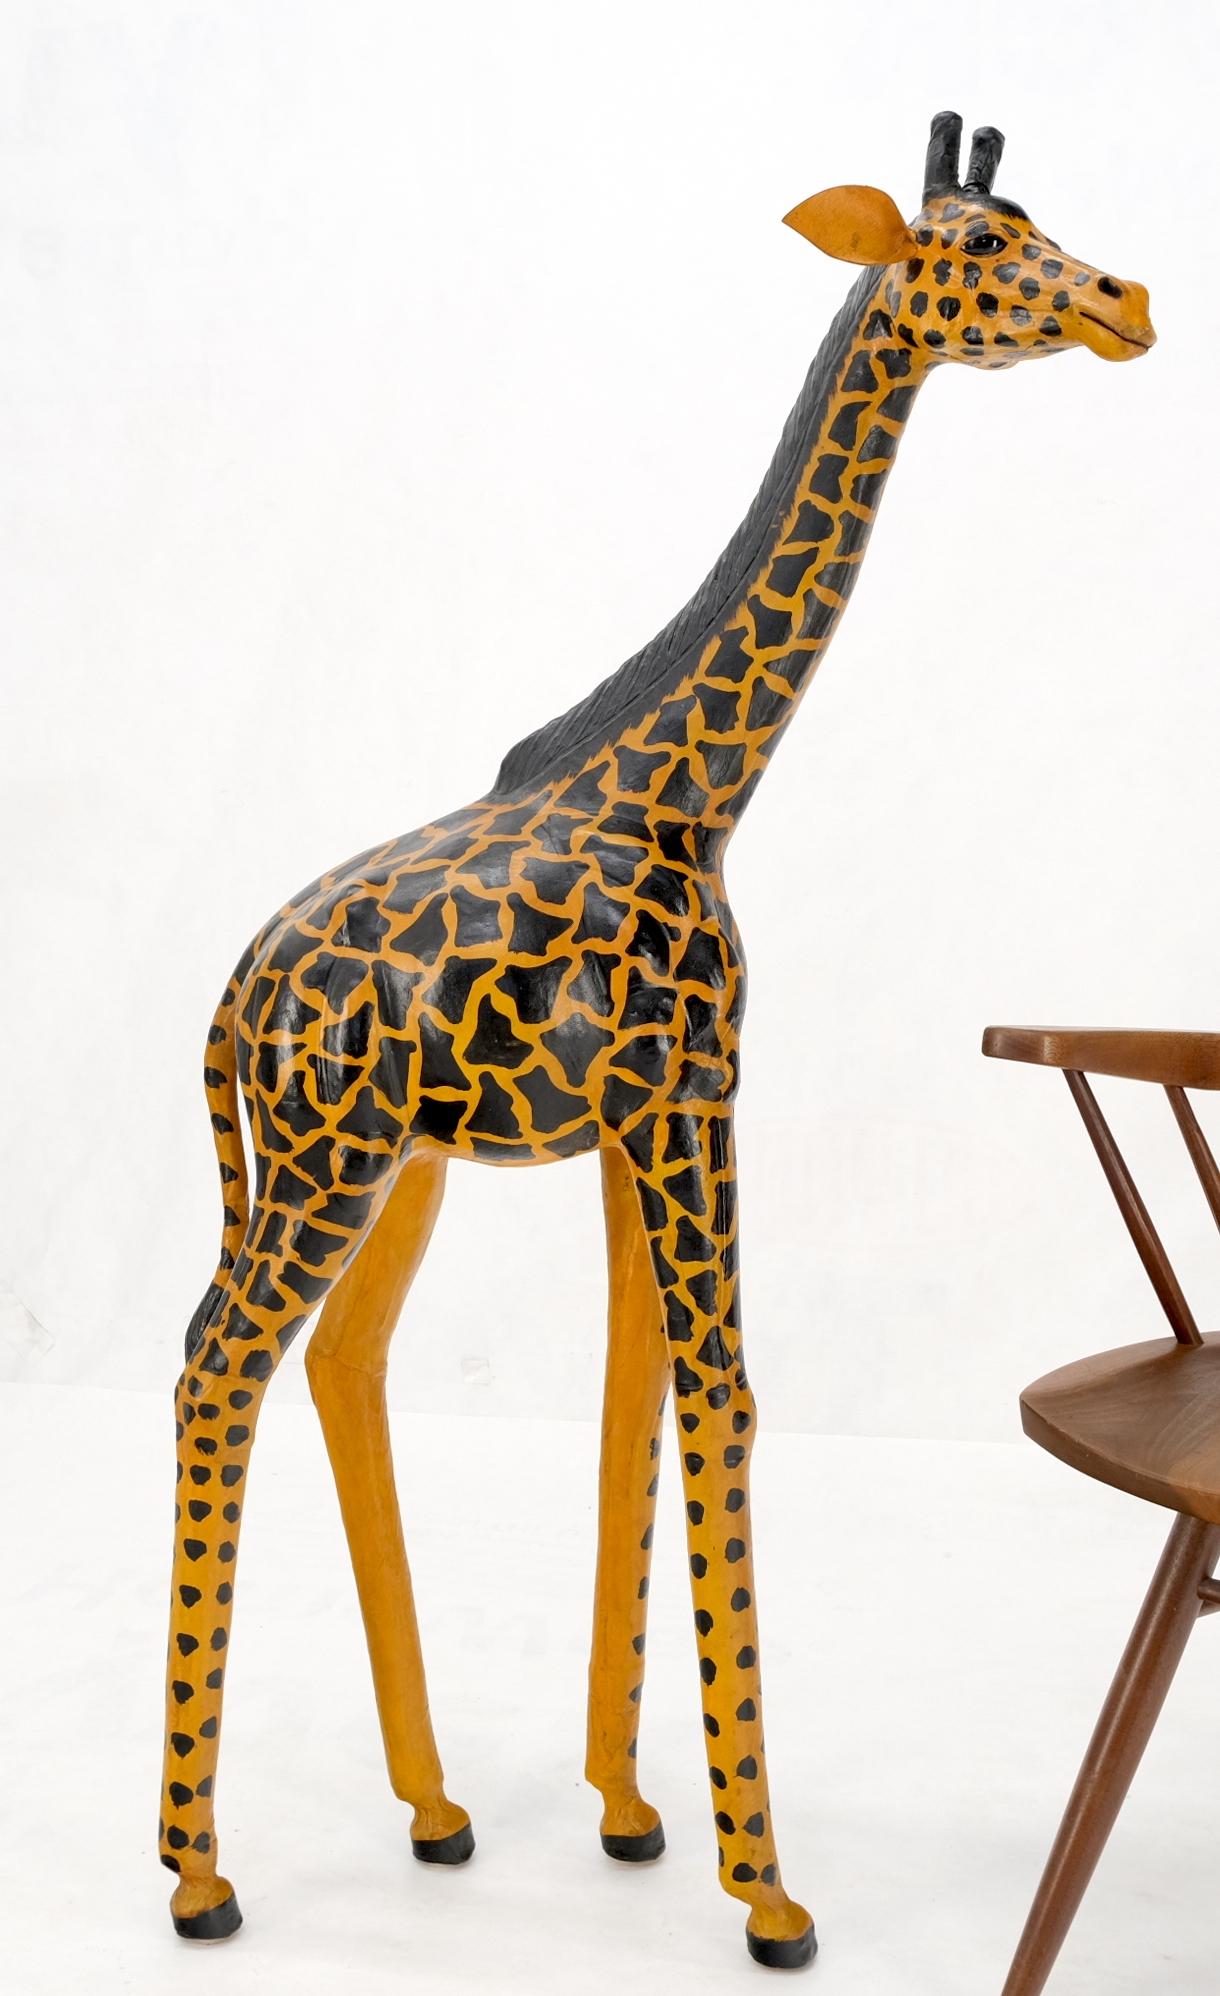 Abercrombie & Fitch Style Tooled leather sculpture of Giraffe.